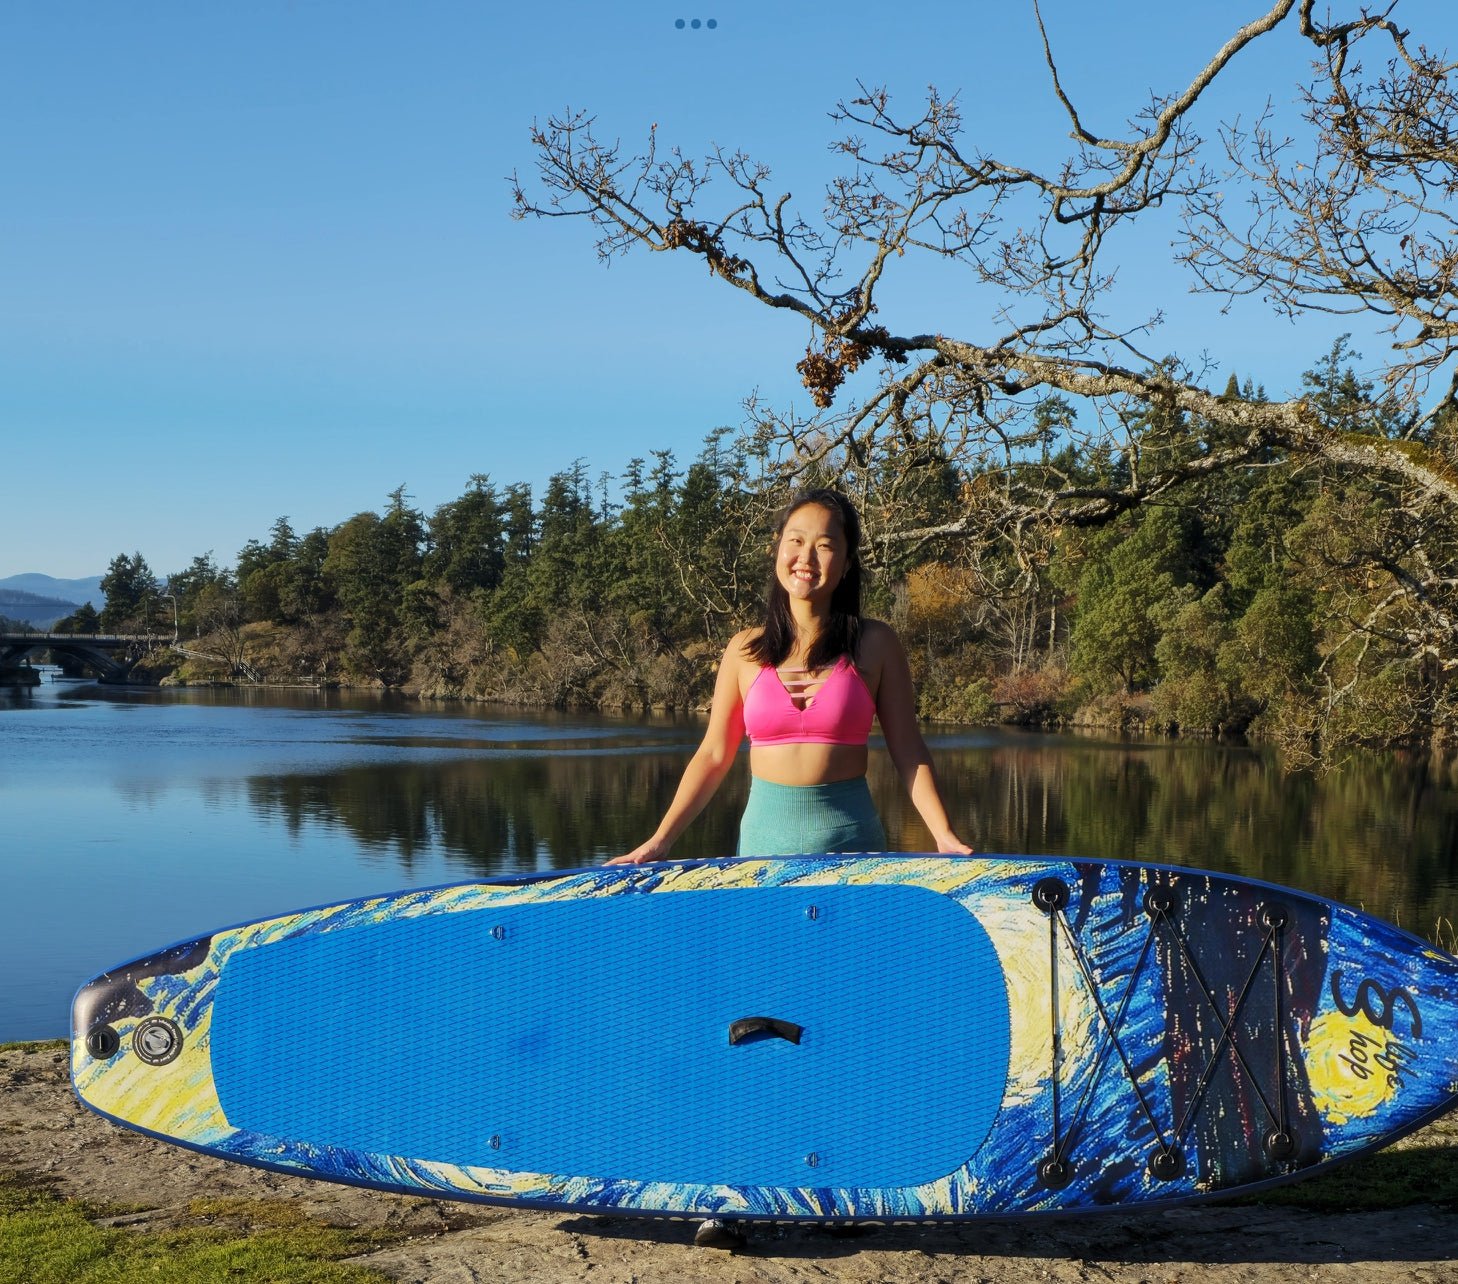 Slifeshop Starry Night Van Gogh Stand Up Paddle Board 10’6” 11’ SUP  Inflatable SUP Designed by Local Canadian Artist